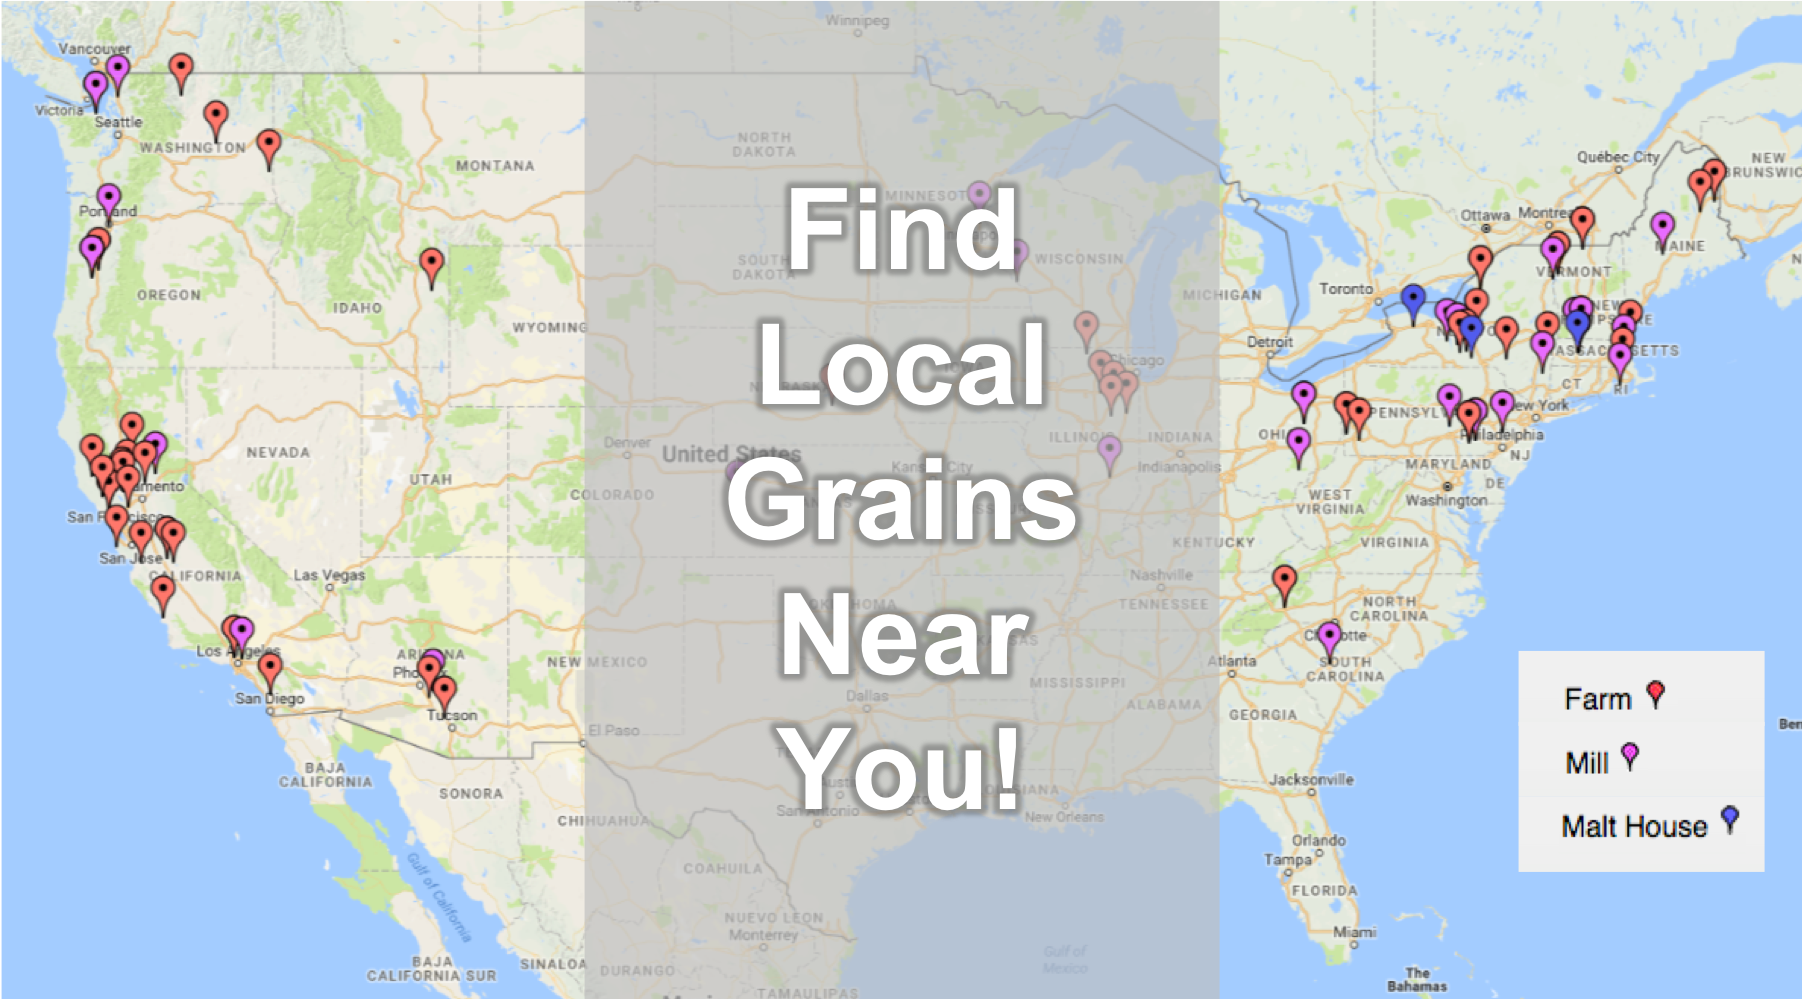 Map of locations of local grain farms, mills, and malt houses